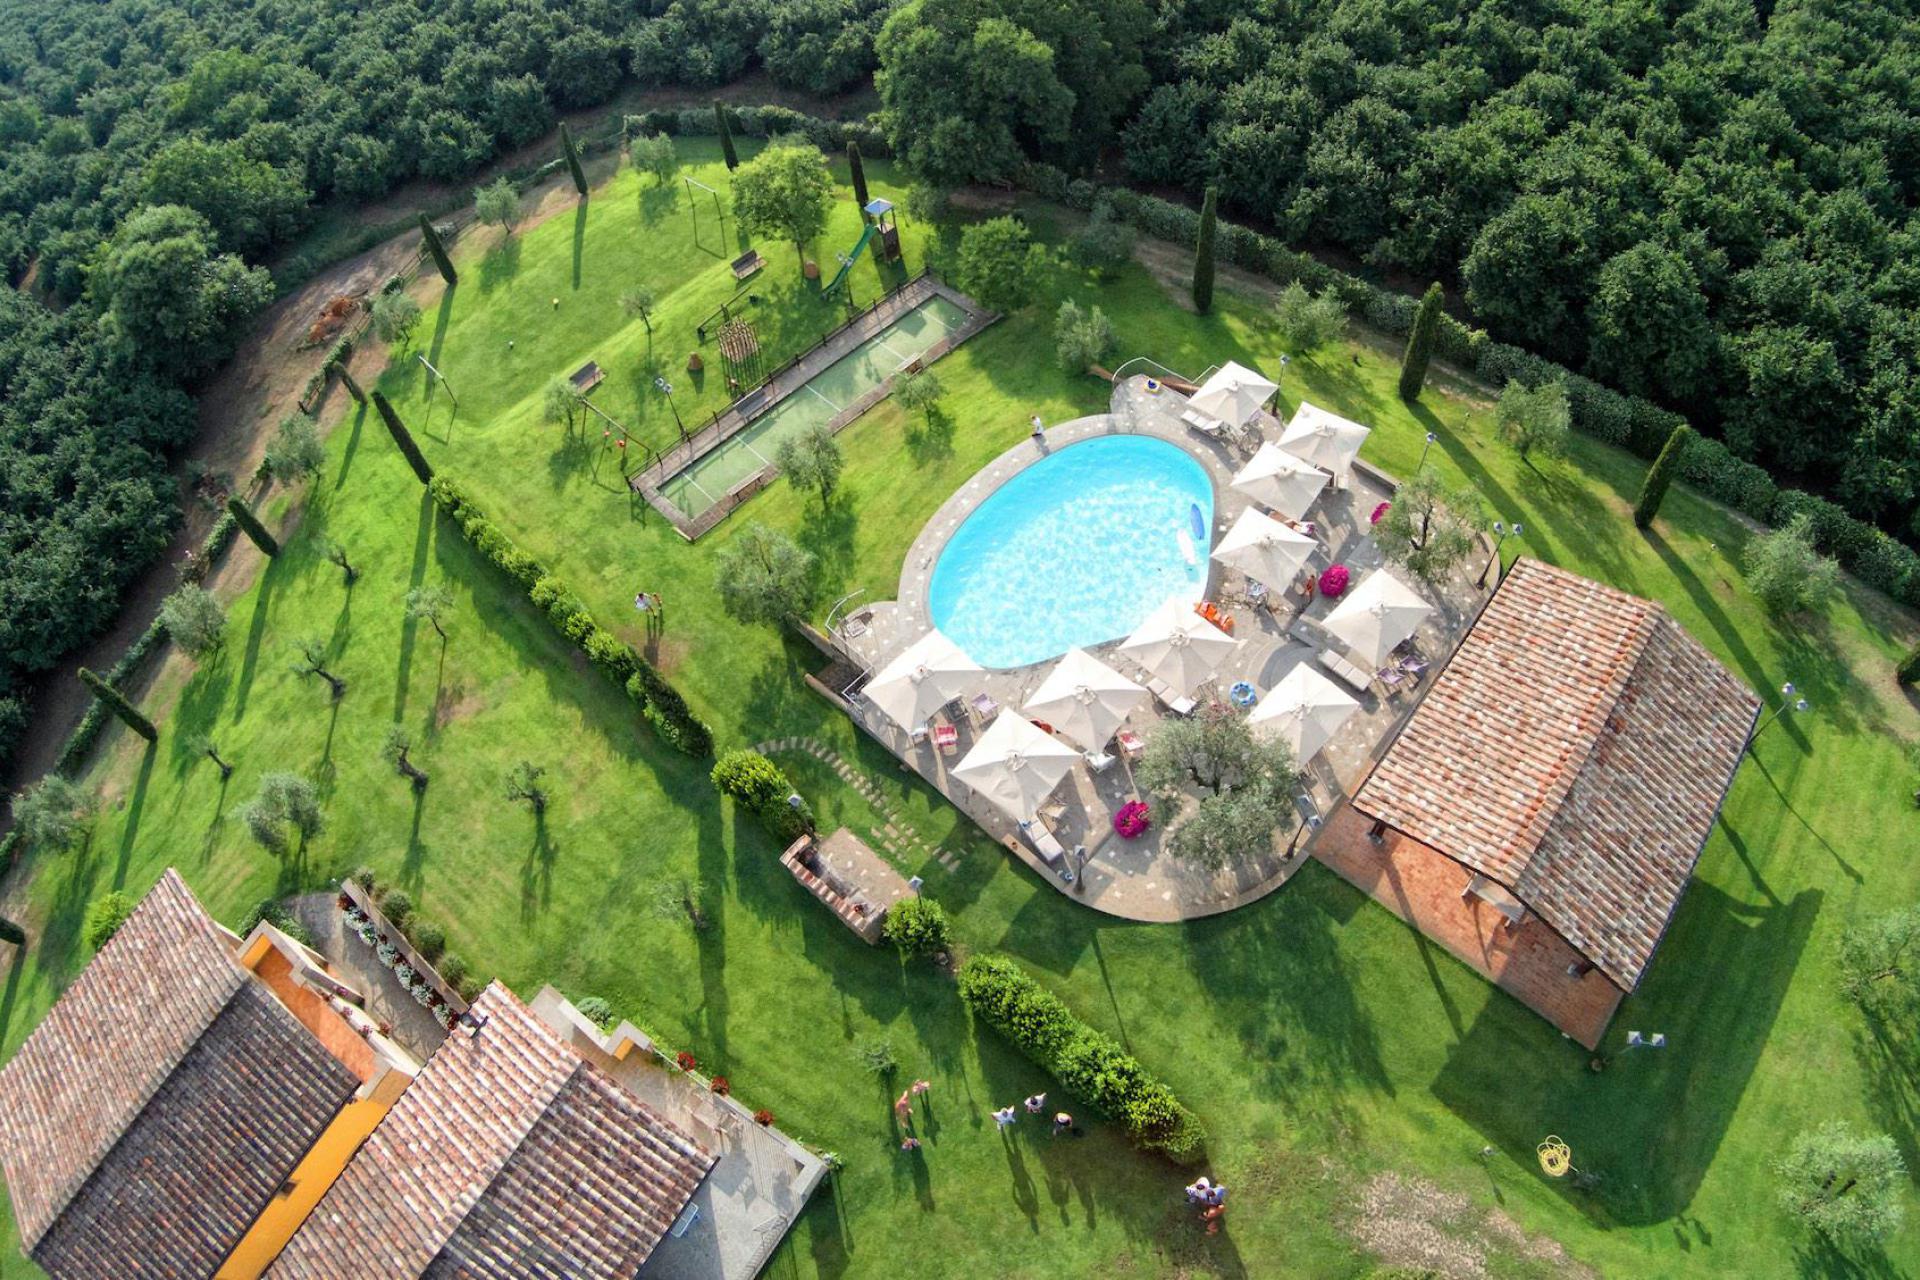 Agriturismo near lake and hour from Rome